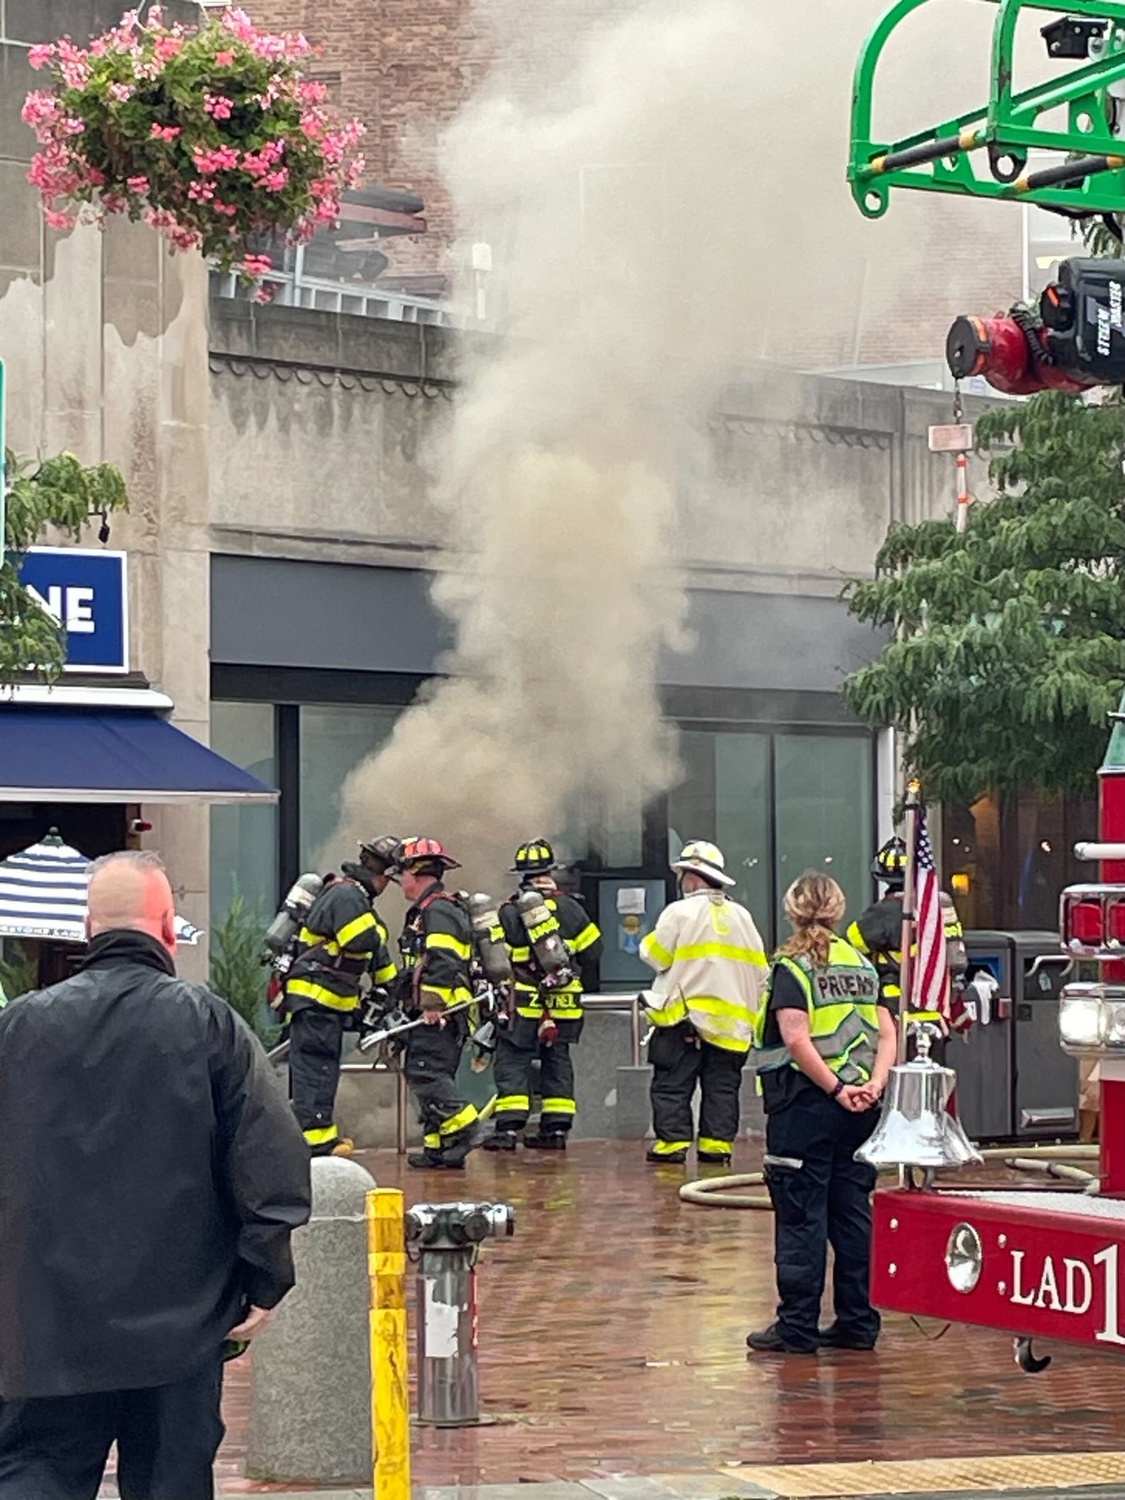 Firefighters observe smoke rising from the scene of a manhole explosion at 27 Brattle Street on Wednesday morning.